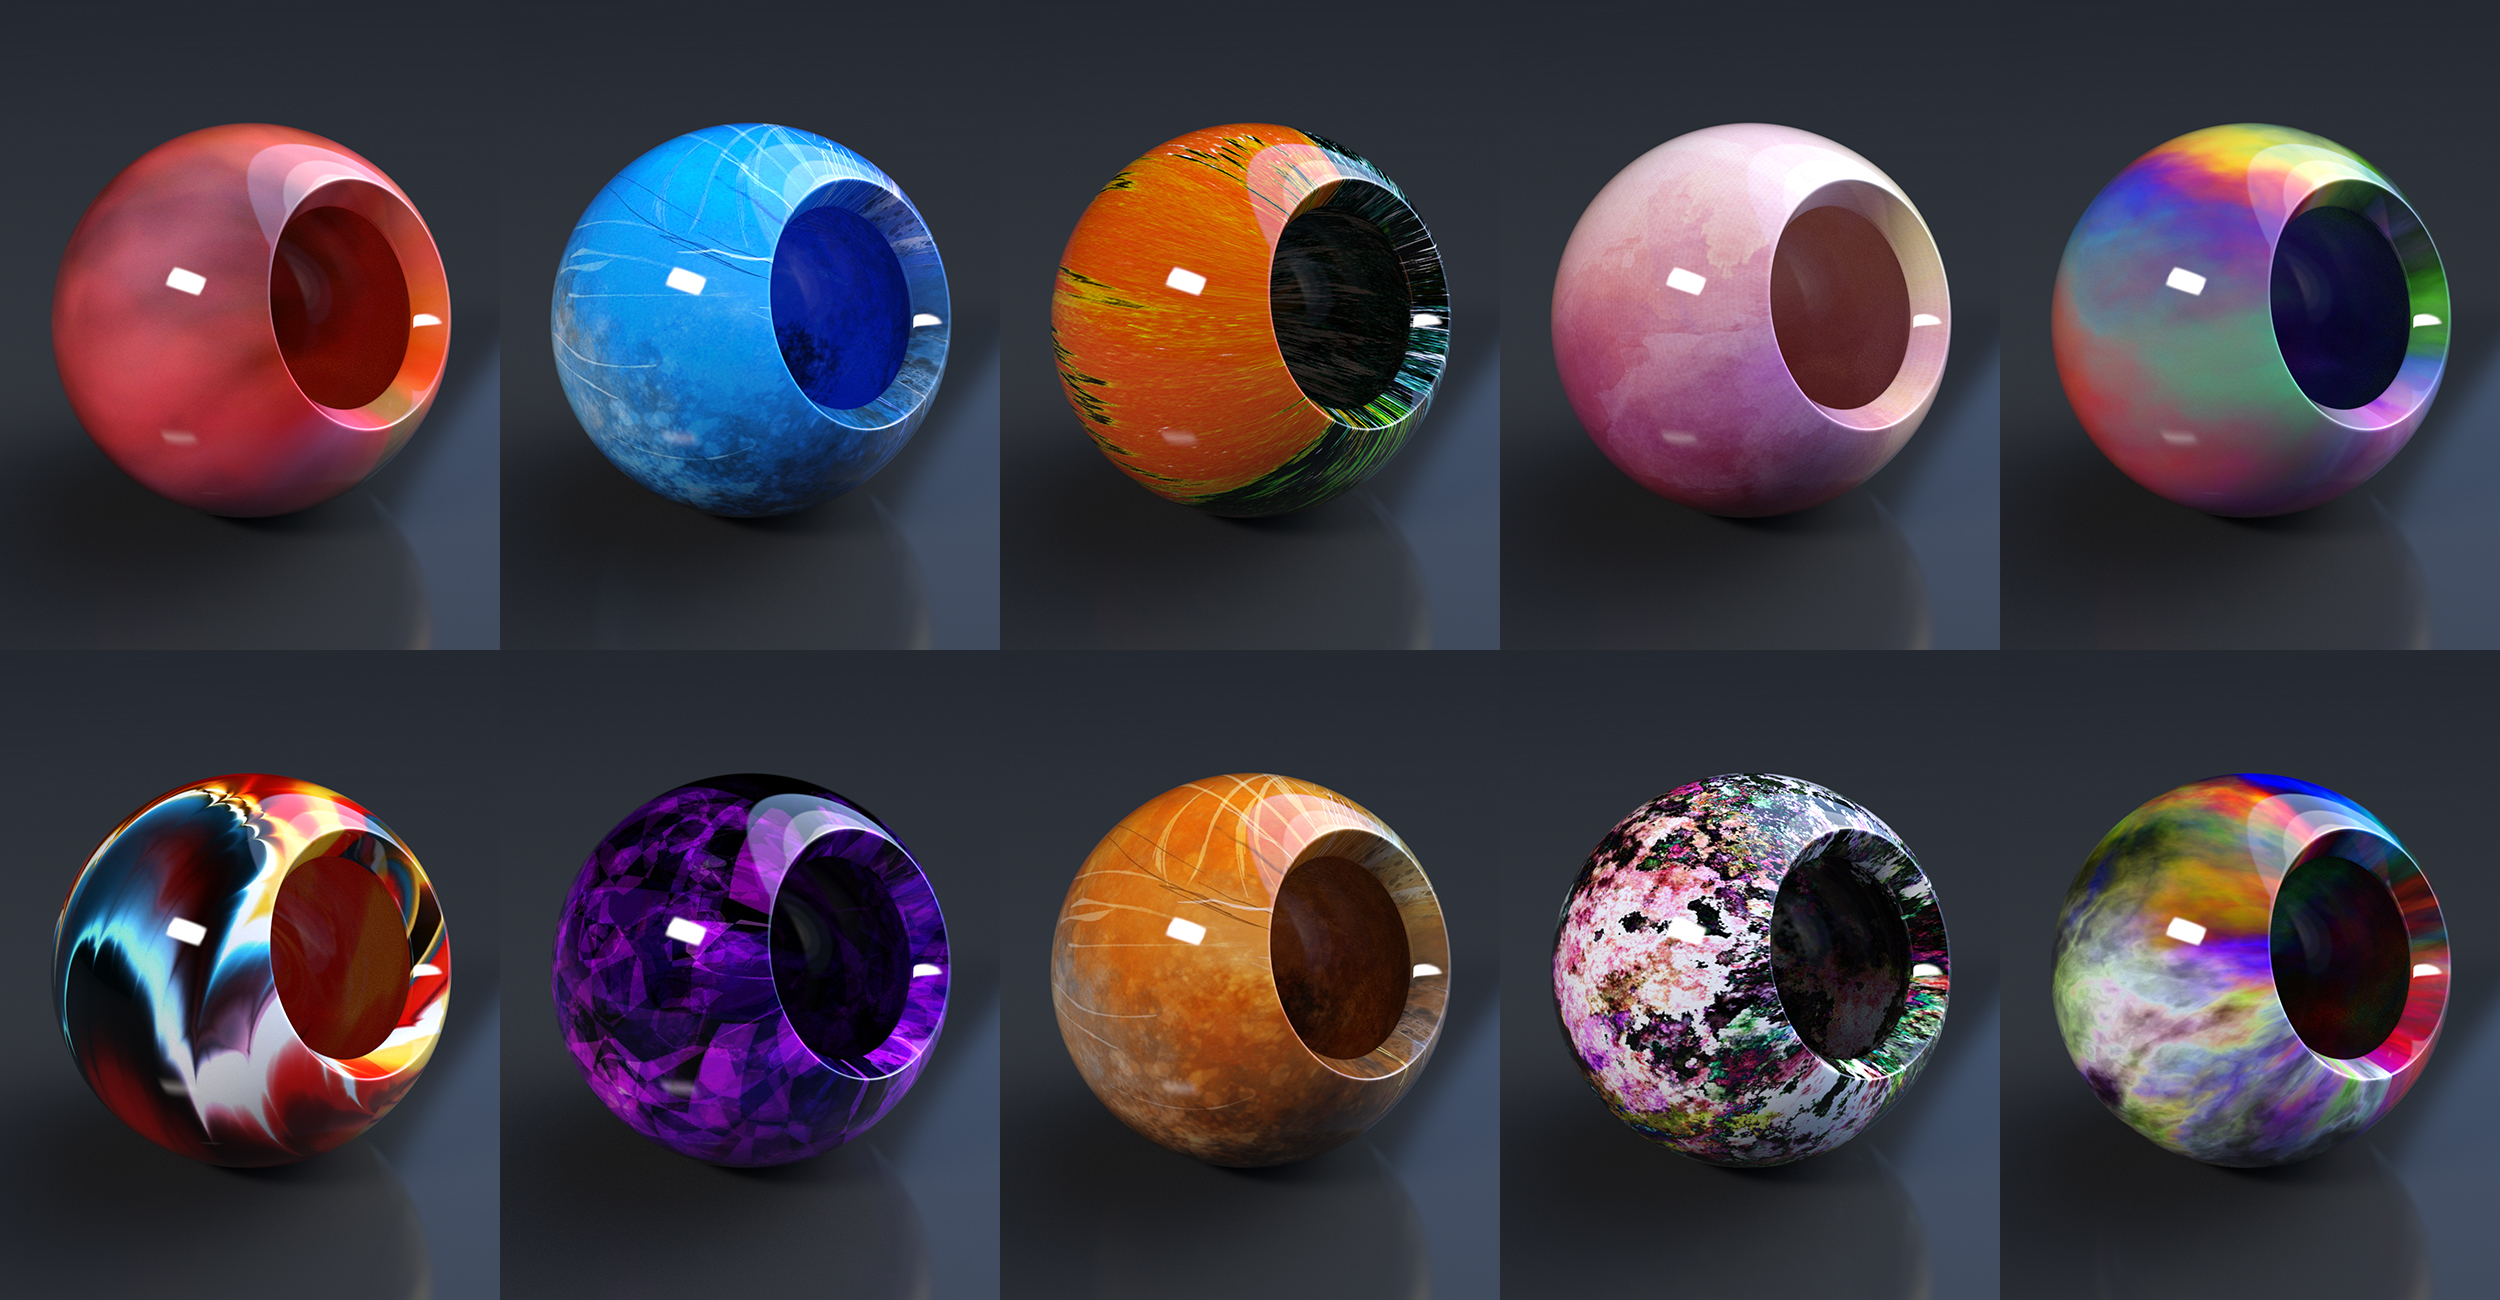 Slime Iray Shaders by: JGreenlees, 3D Models by Daz 3D